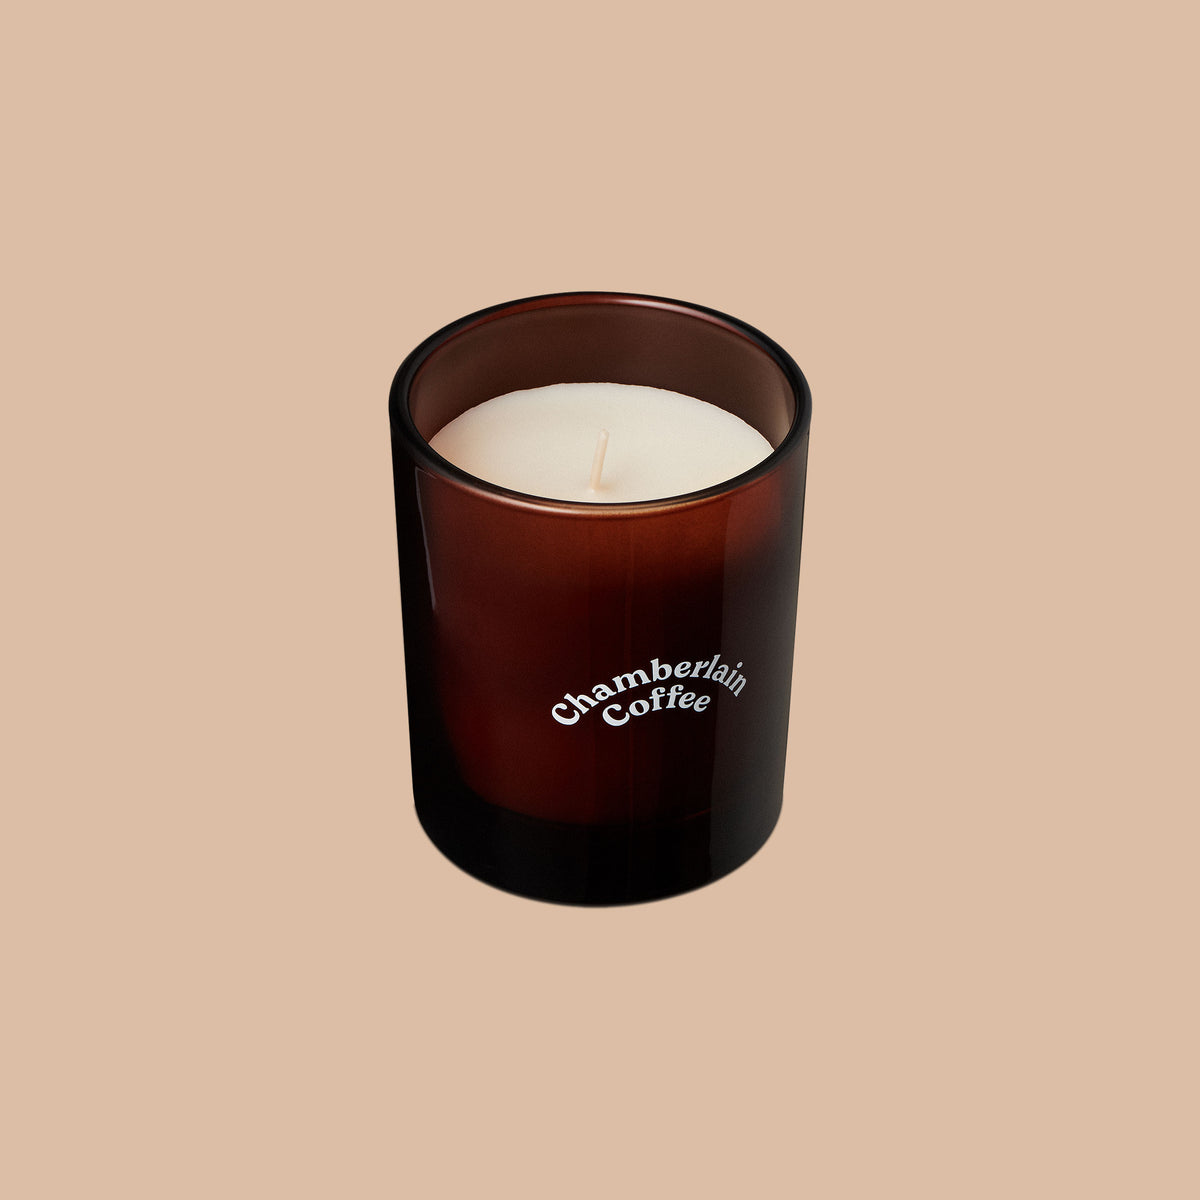 chamberlain coffee scented candle